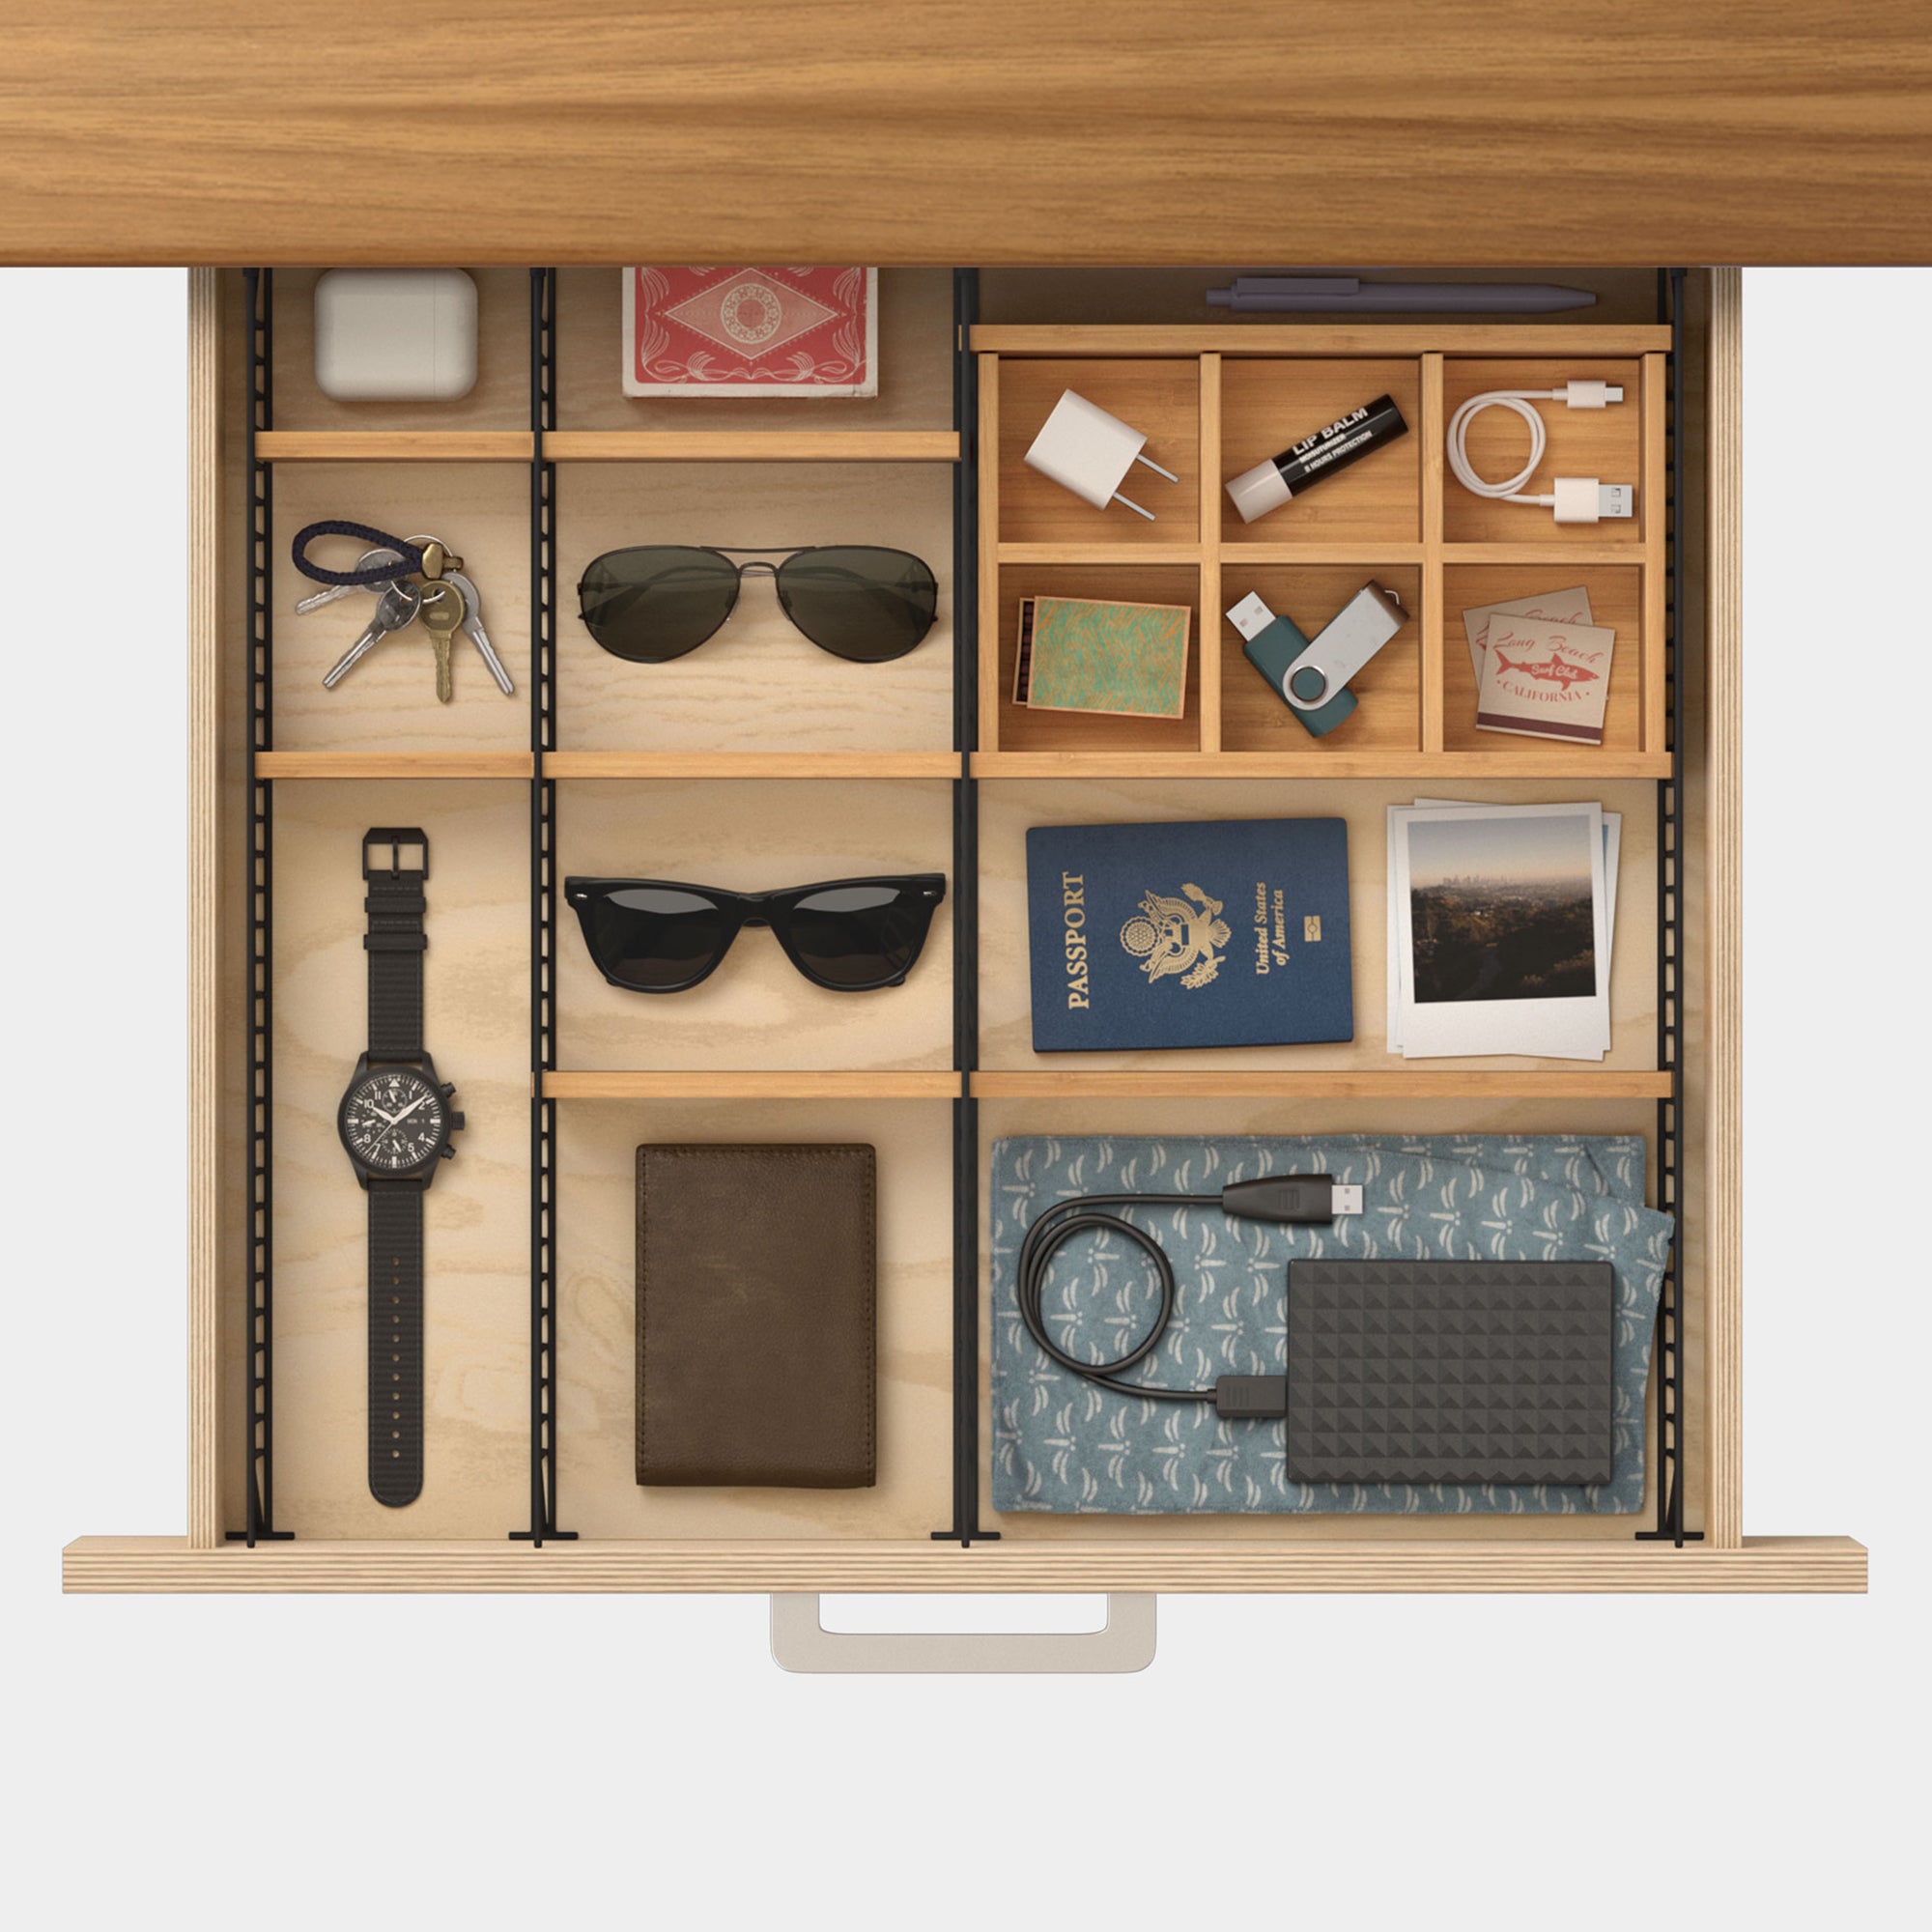 The Satisfyingly Well-Ordered Drawer: Minimal, Modular Systems for Tiny Place